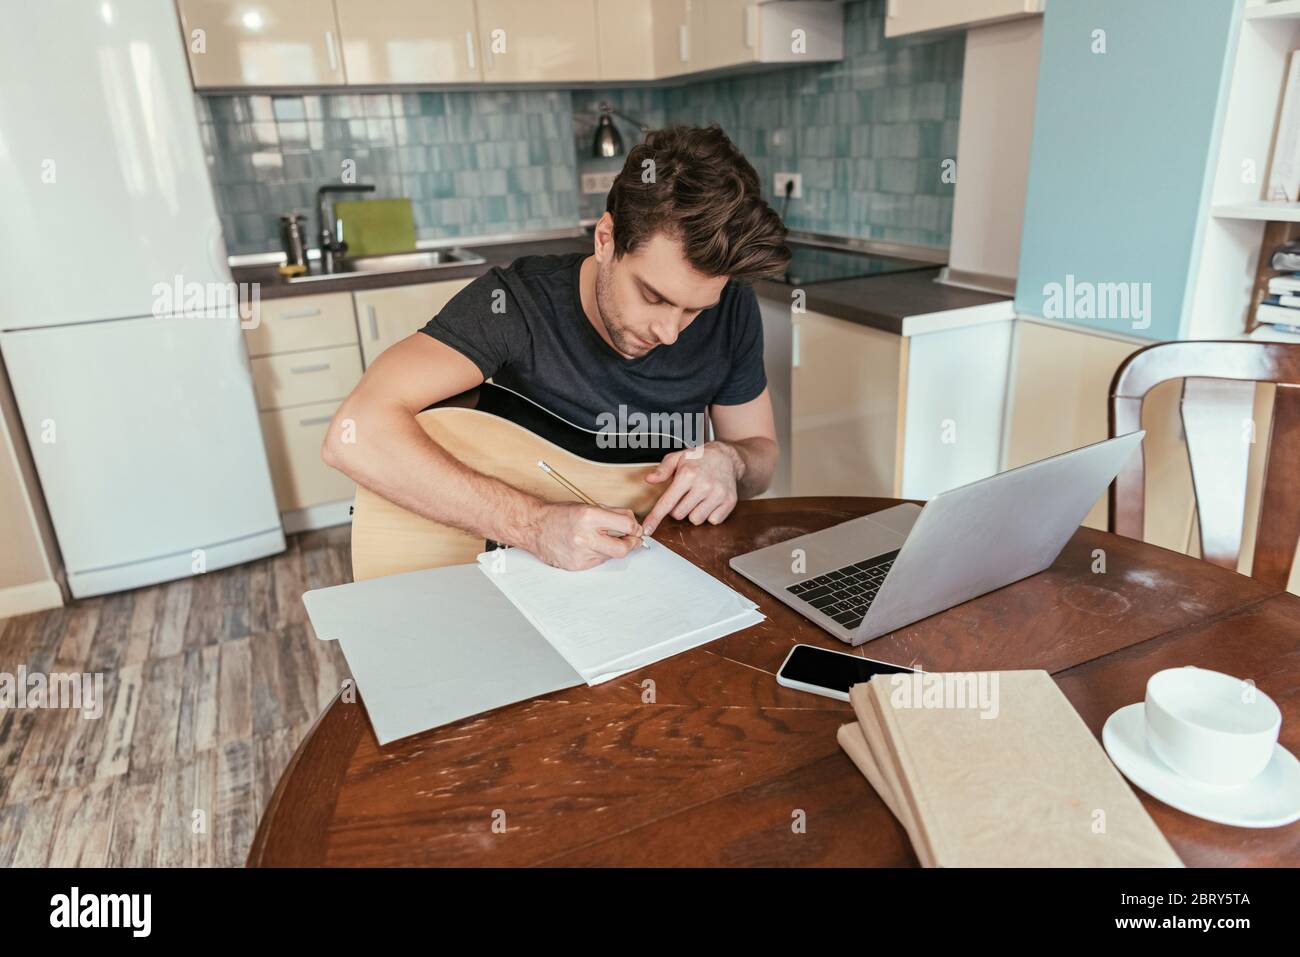 high angle view of attentive young man with guitar writing on paper while sitting near laptop Stock Photo